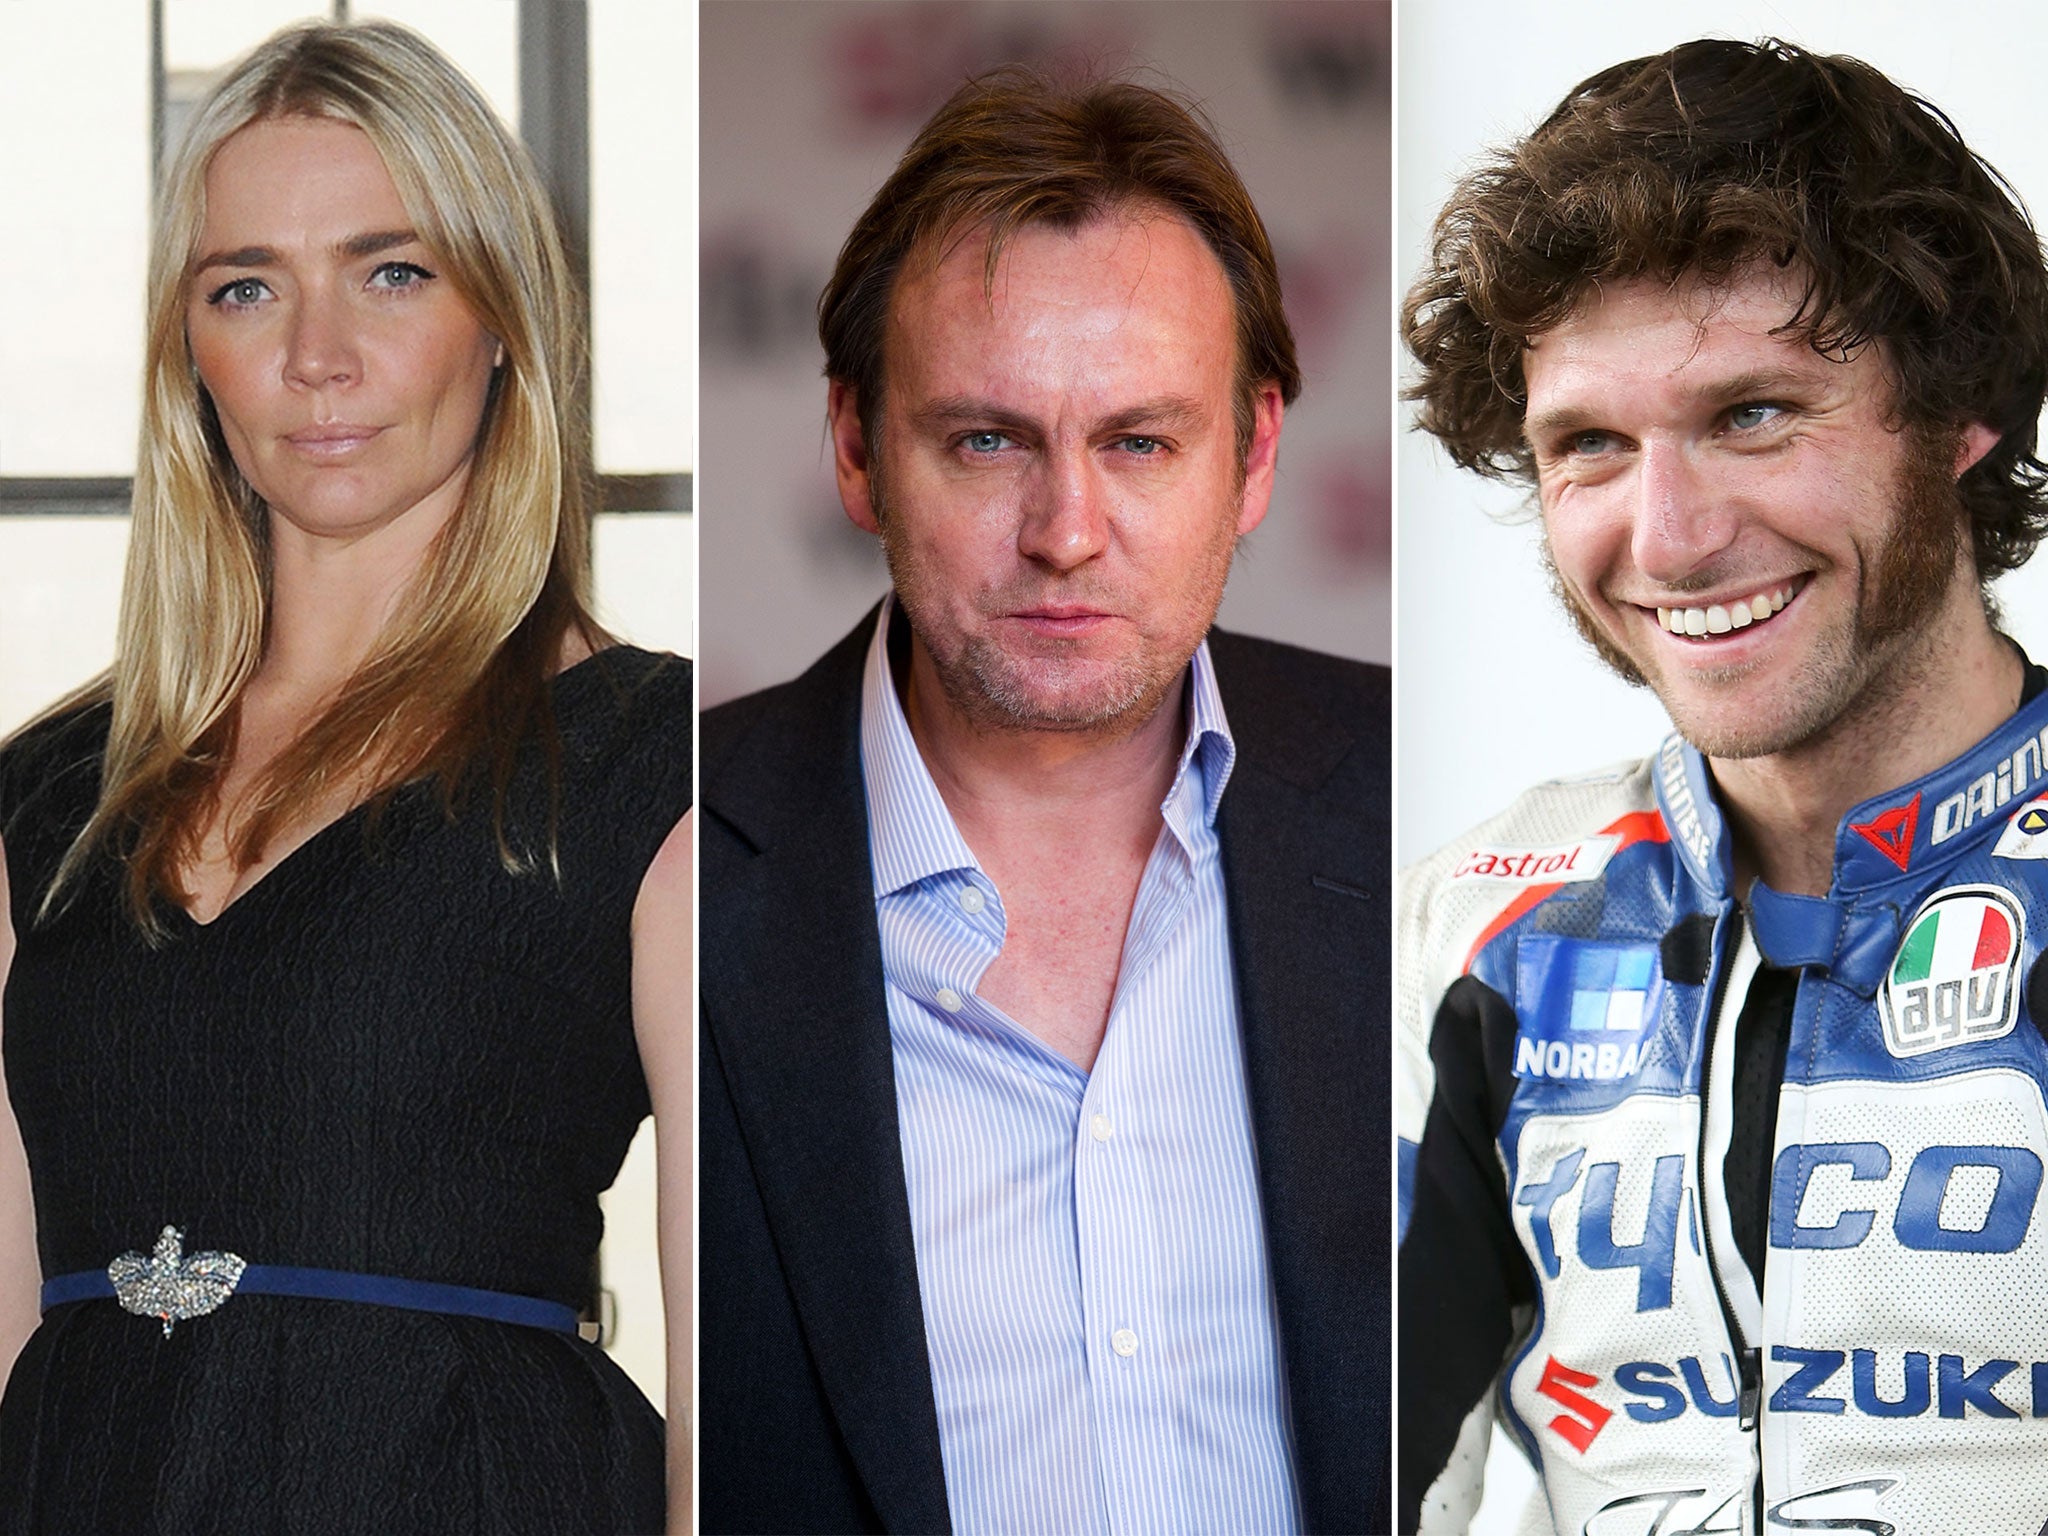 Jodie Kidd, Philip Glenister and Guy Martin are reported to be in 'advanced talks' to front Top Gear when it returns next year